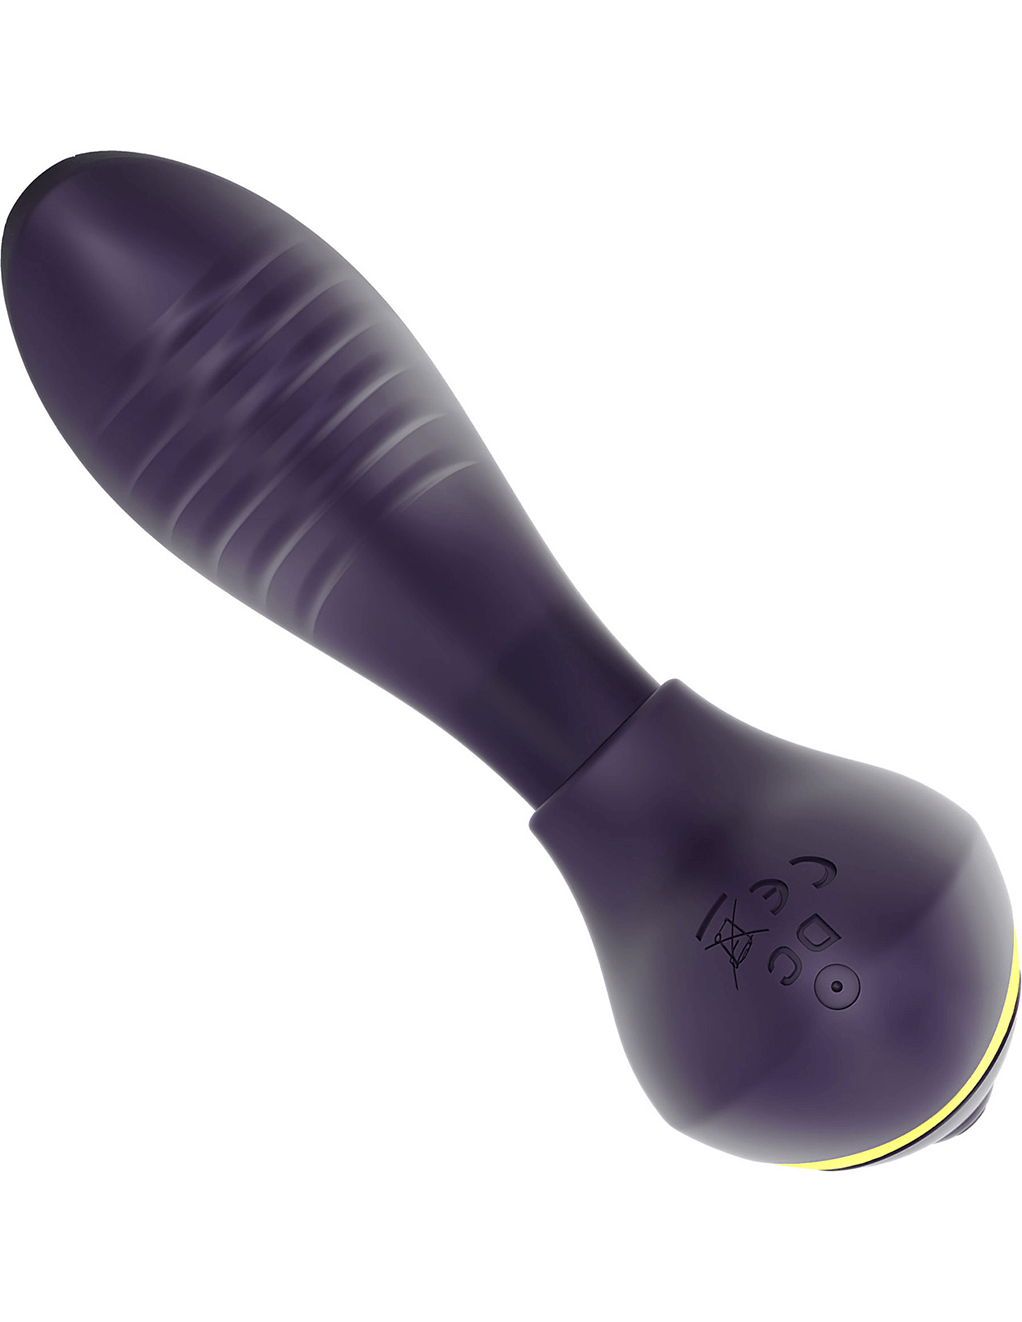 TRACY'S DOG OG CLITORAL SUCKING VIBRATOR WITH PLEASURE AIR & G-SPOT VIBRATION - PURPLE